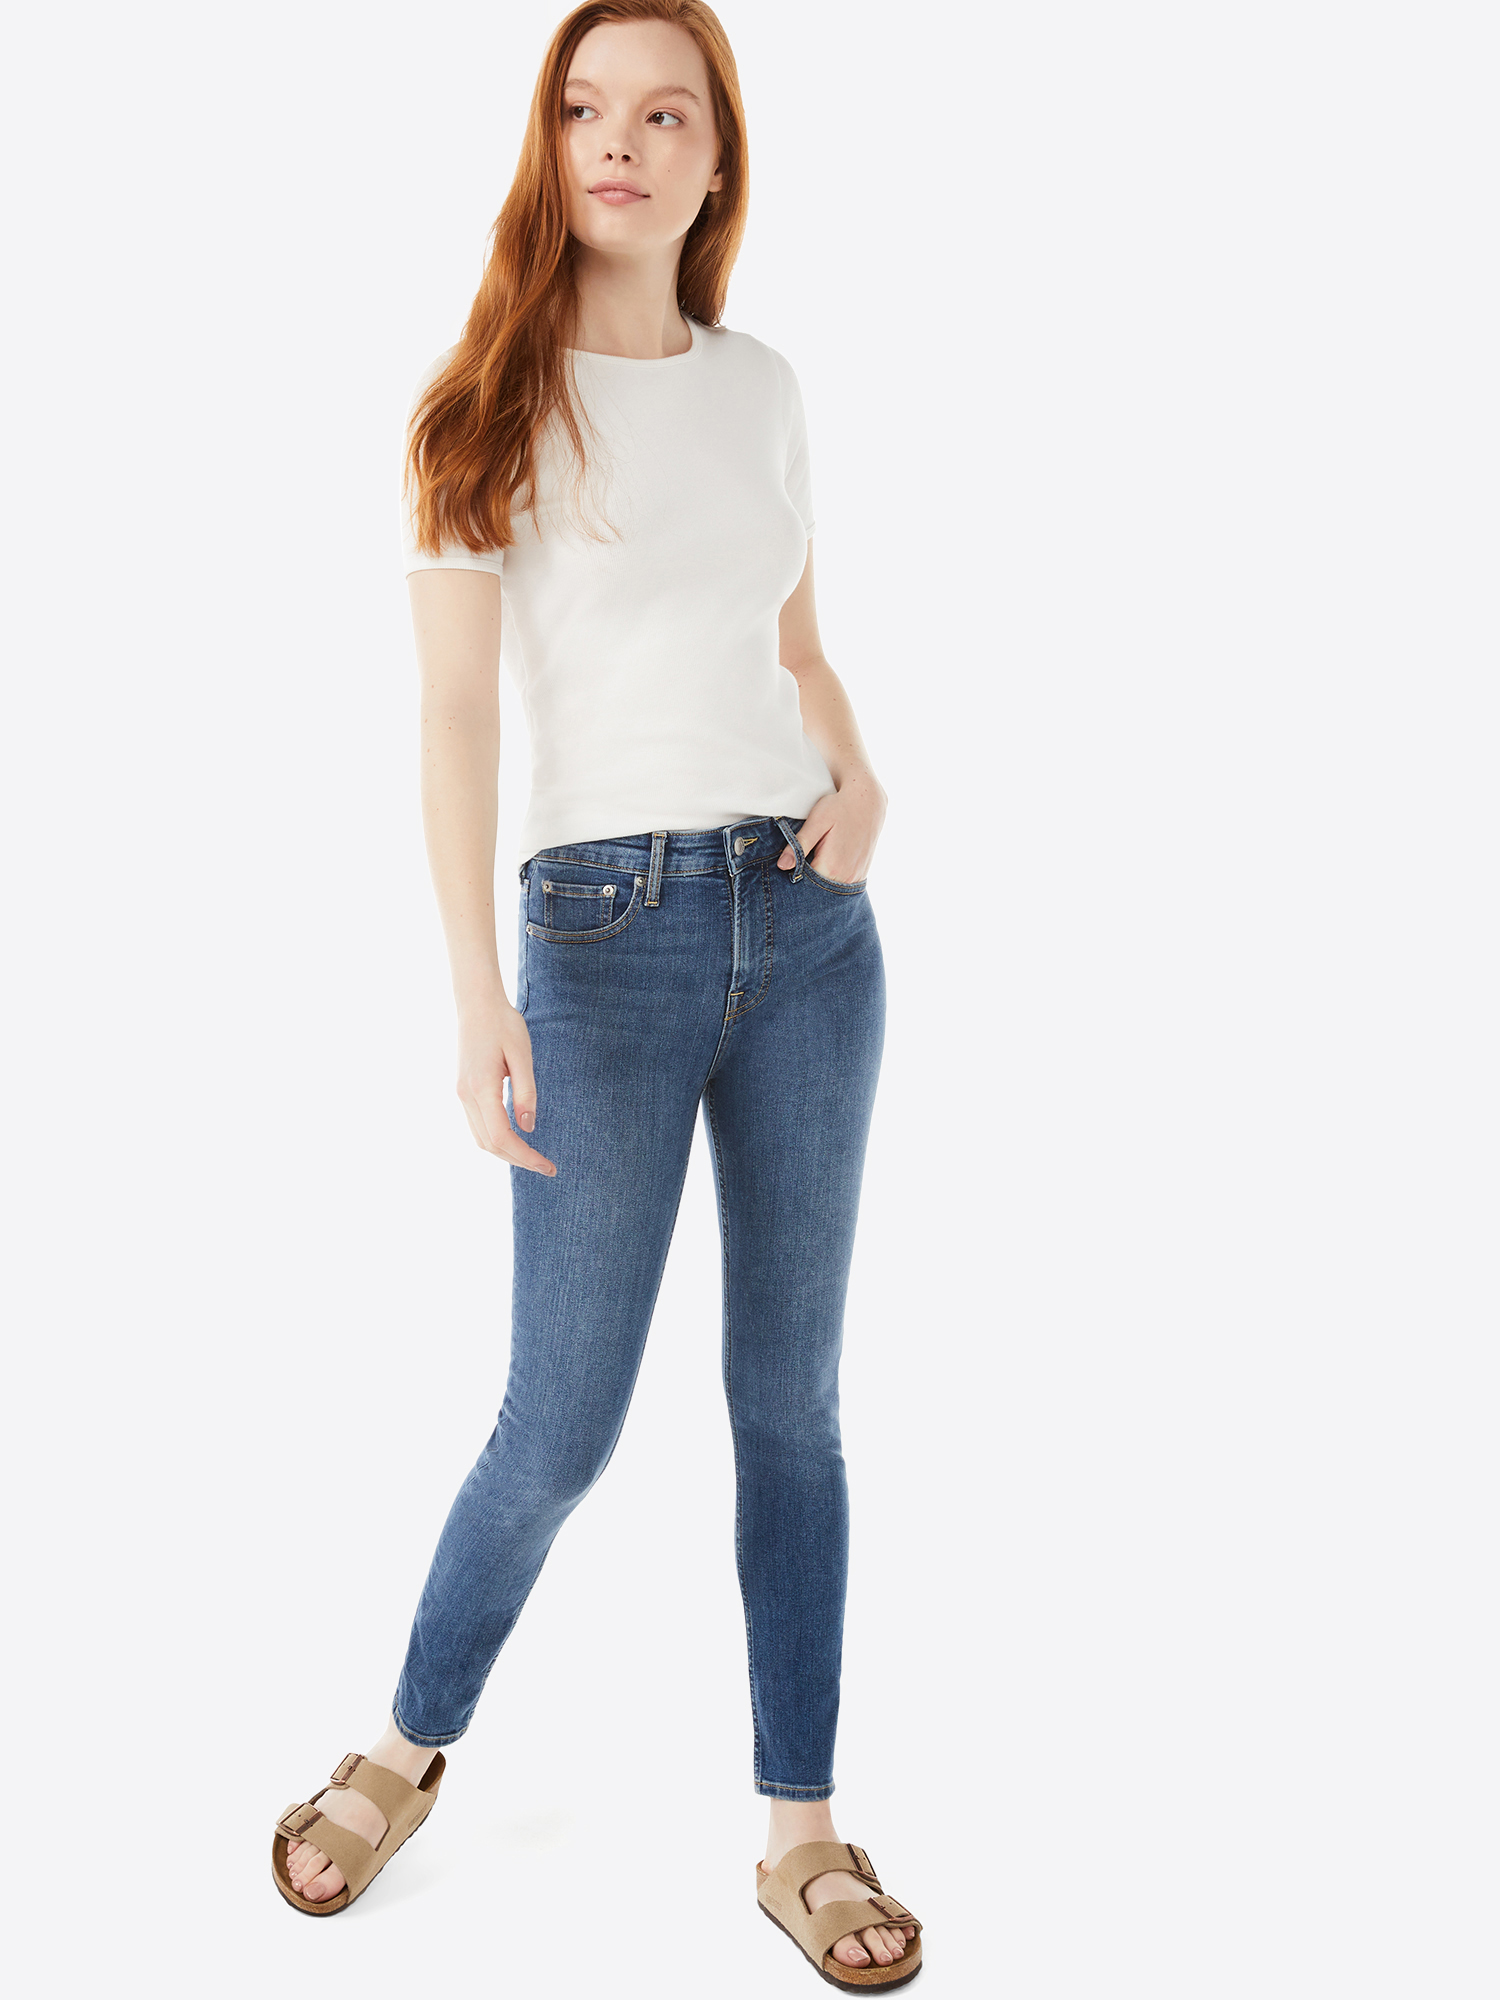 Free Assembly Women's Essential High Rise Skinny Jeans - image 3 of 8